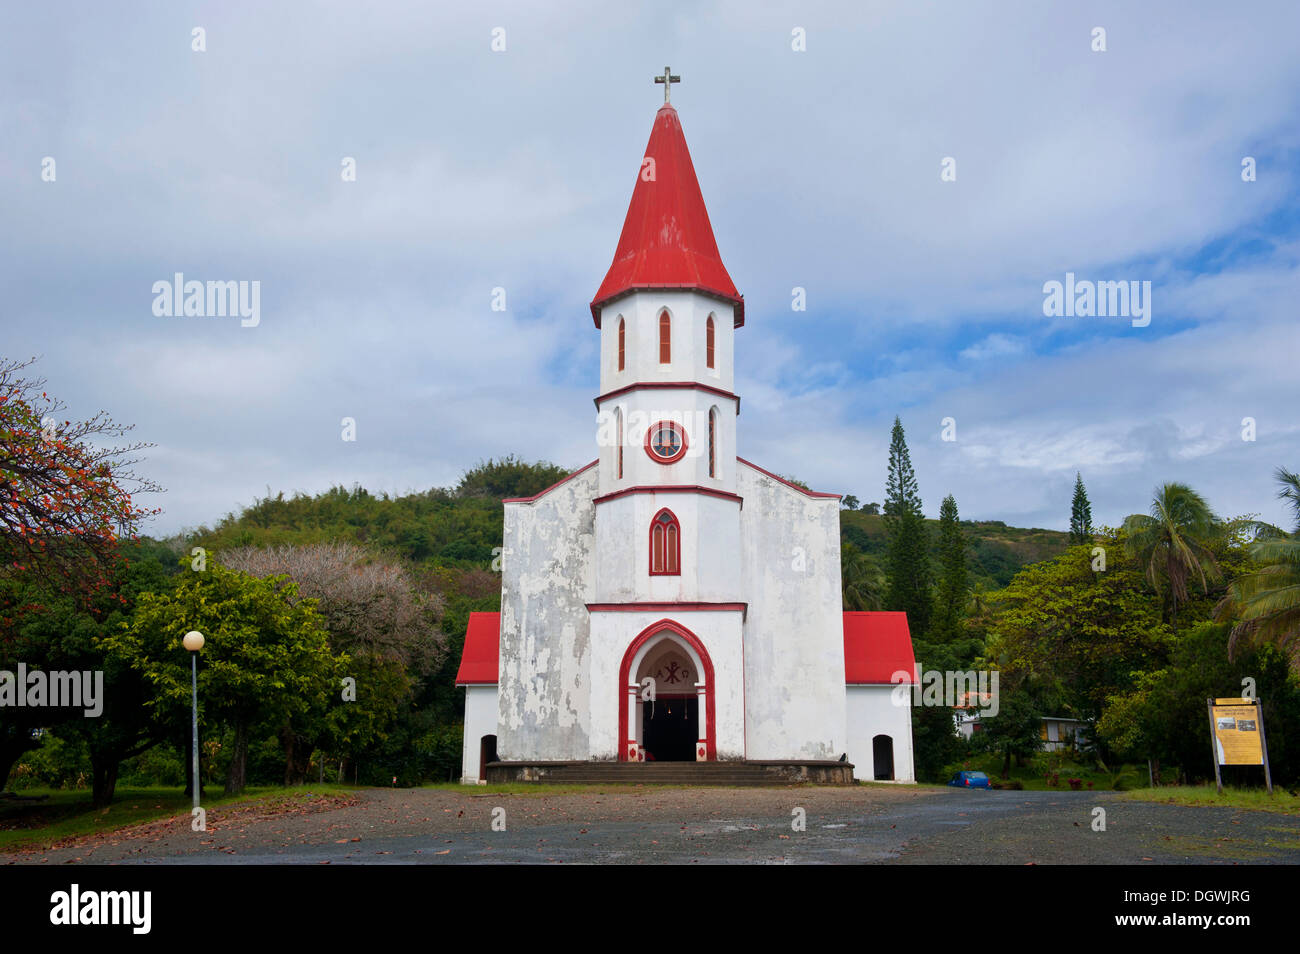 Mission Church of Poindimié, Poindimié, North Province, Grande Terre, New Caledonia, France Stock Photo